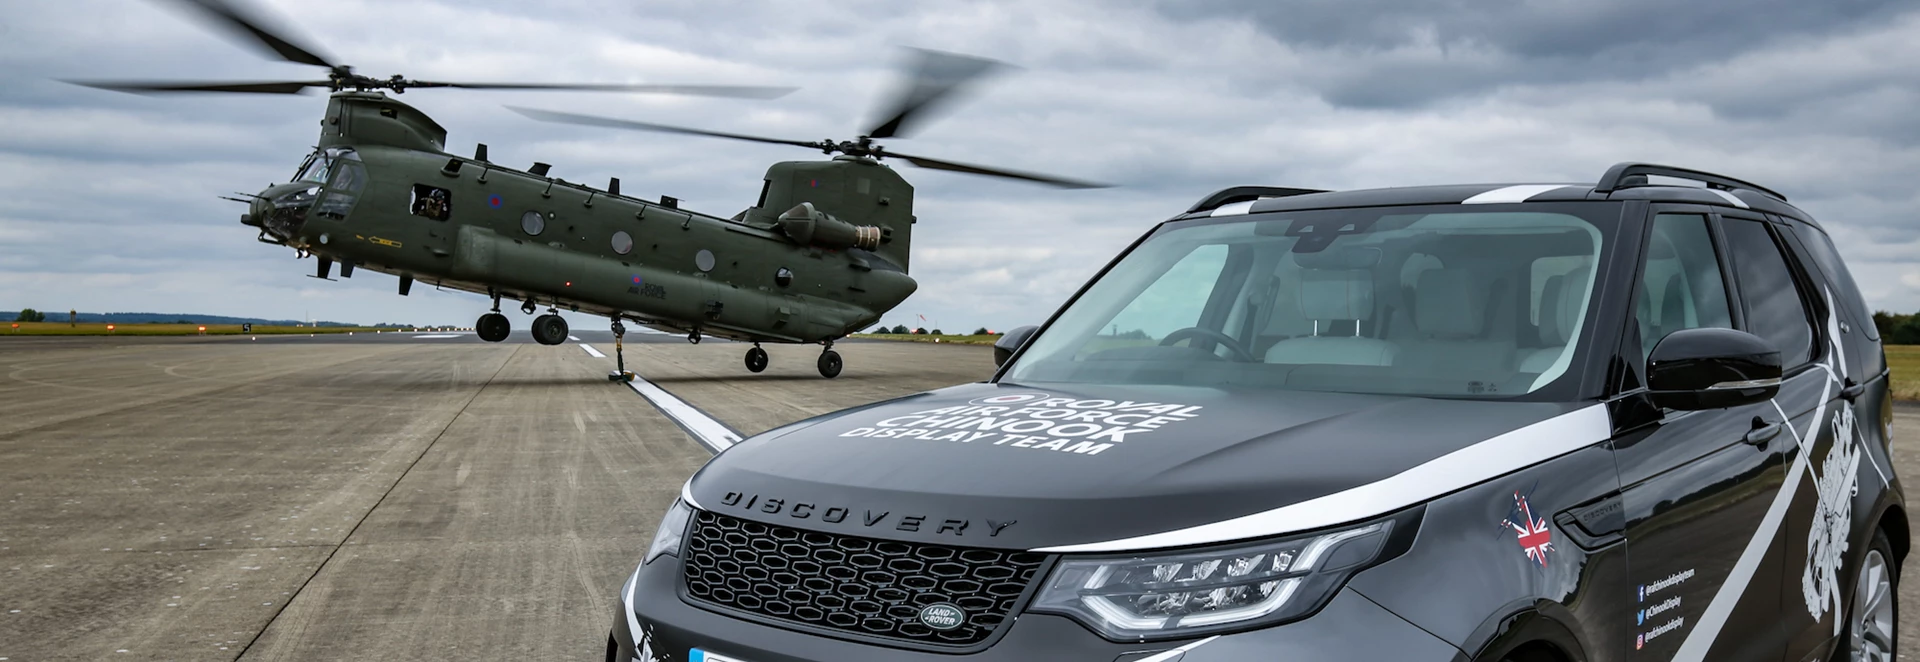 Land Rover to provide support for RAF Chinook Display team